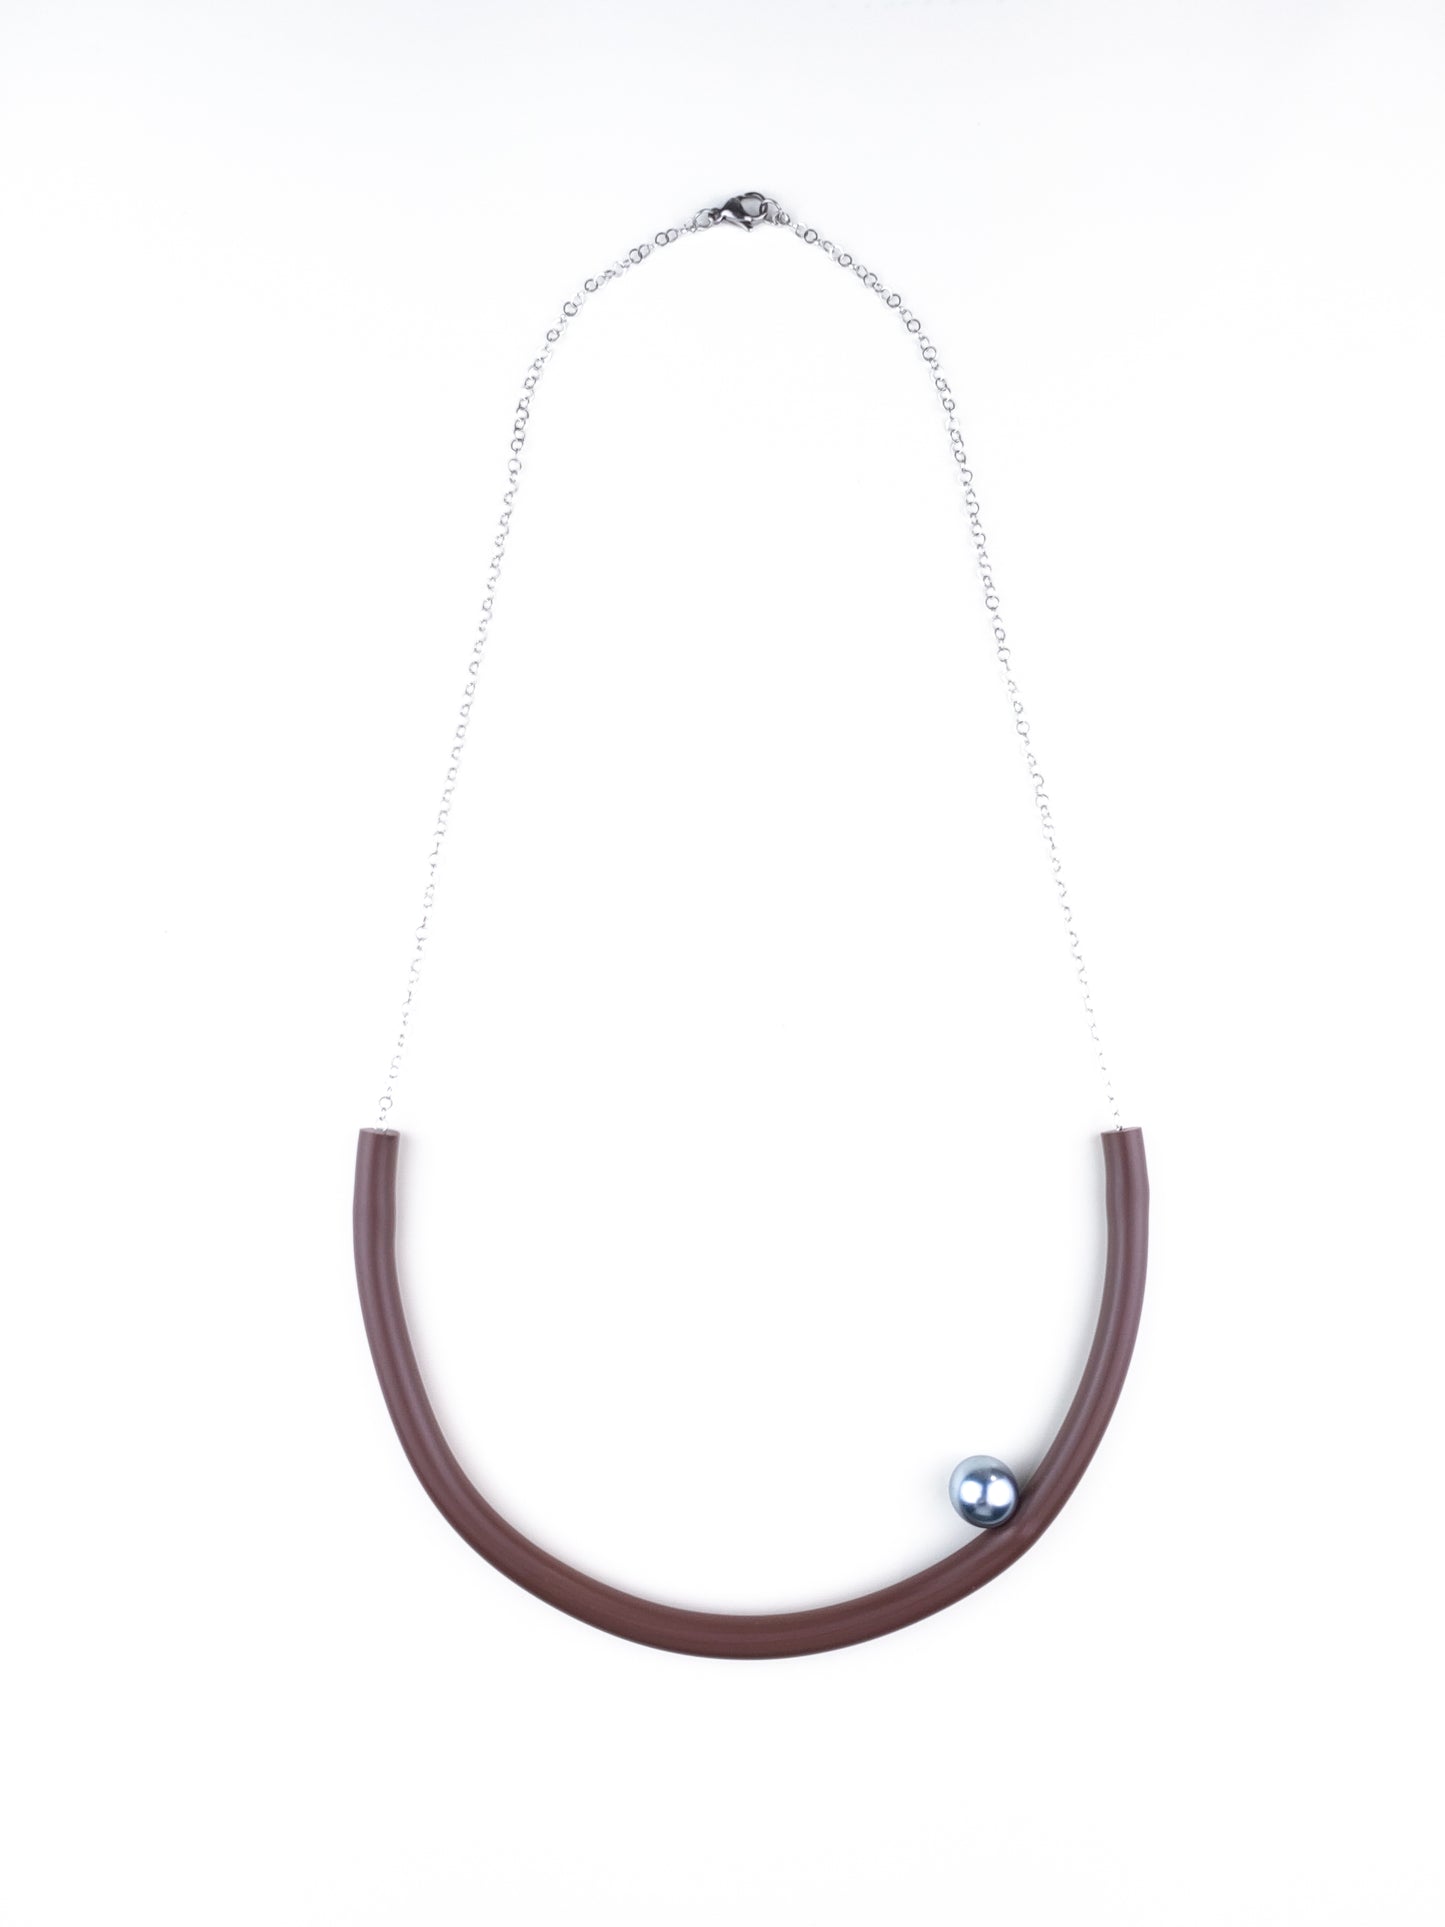 BILICO round necklace - brown / red pearl